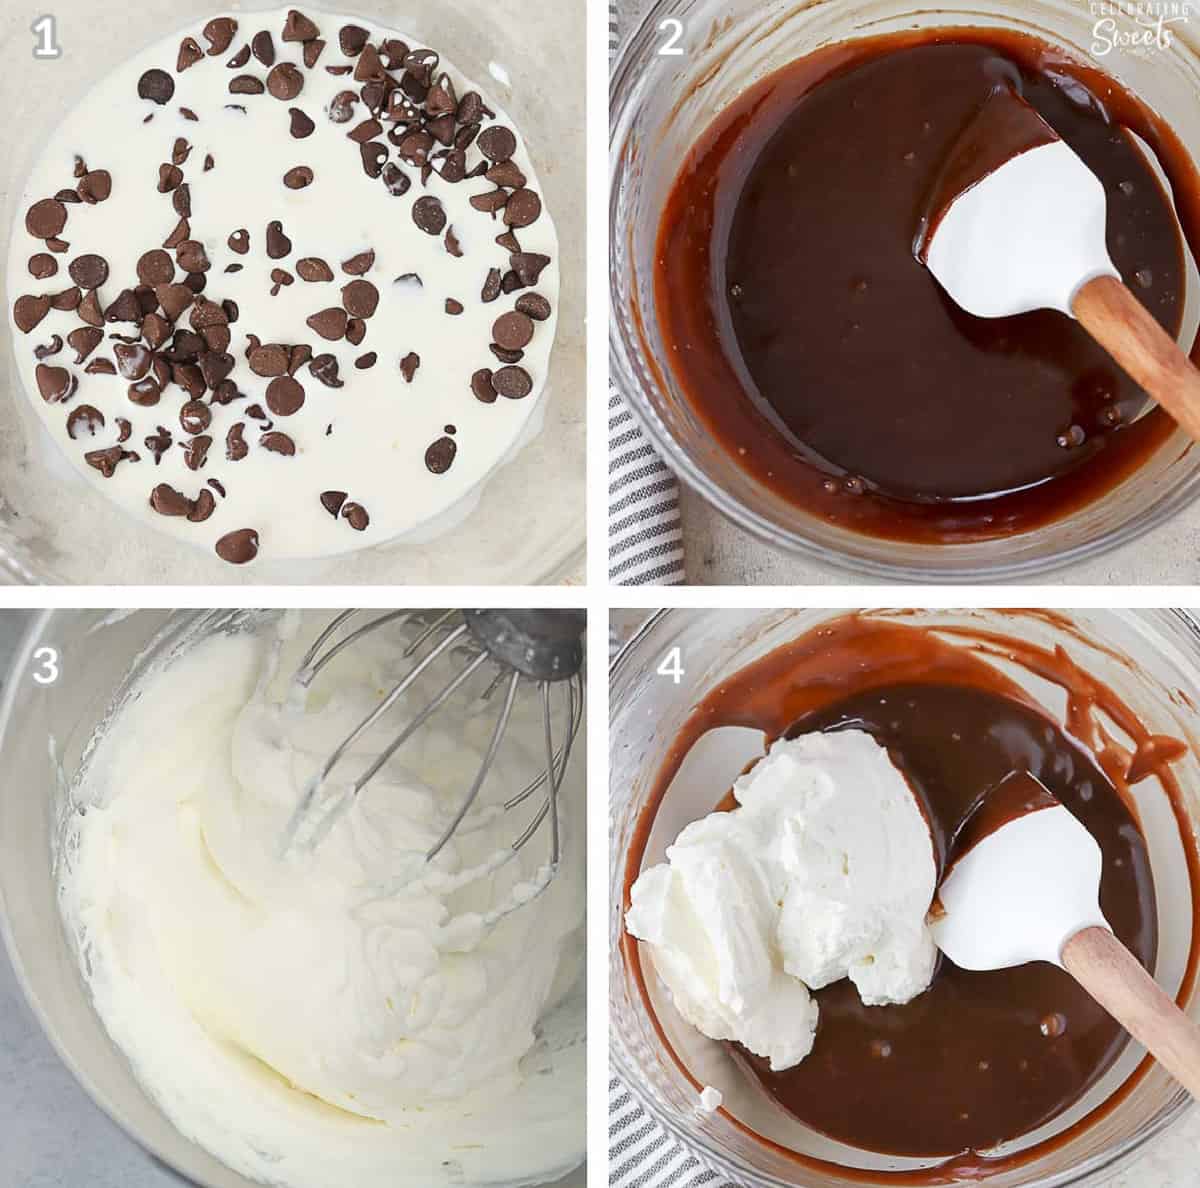 Step by step collage of how to make chocolate mousse: chocolate chips and cream in a glass bowl.